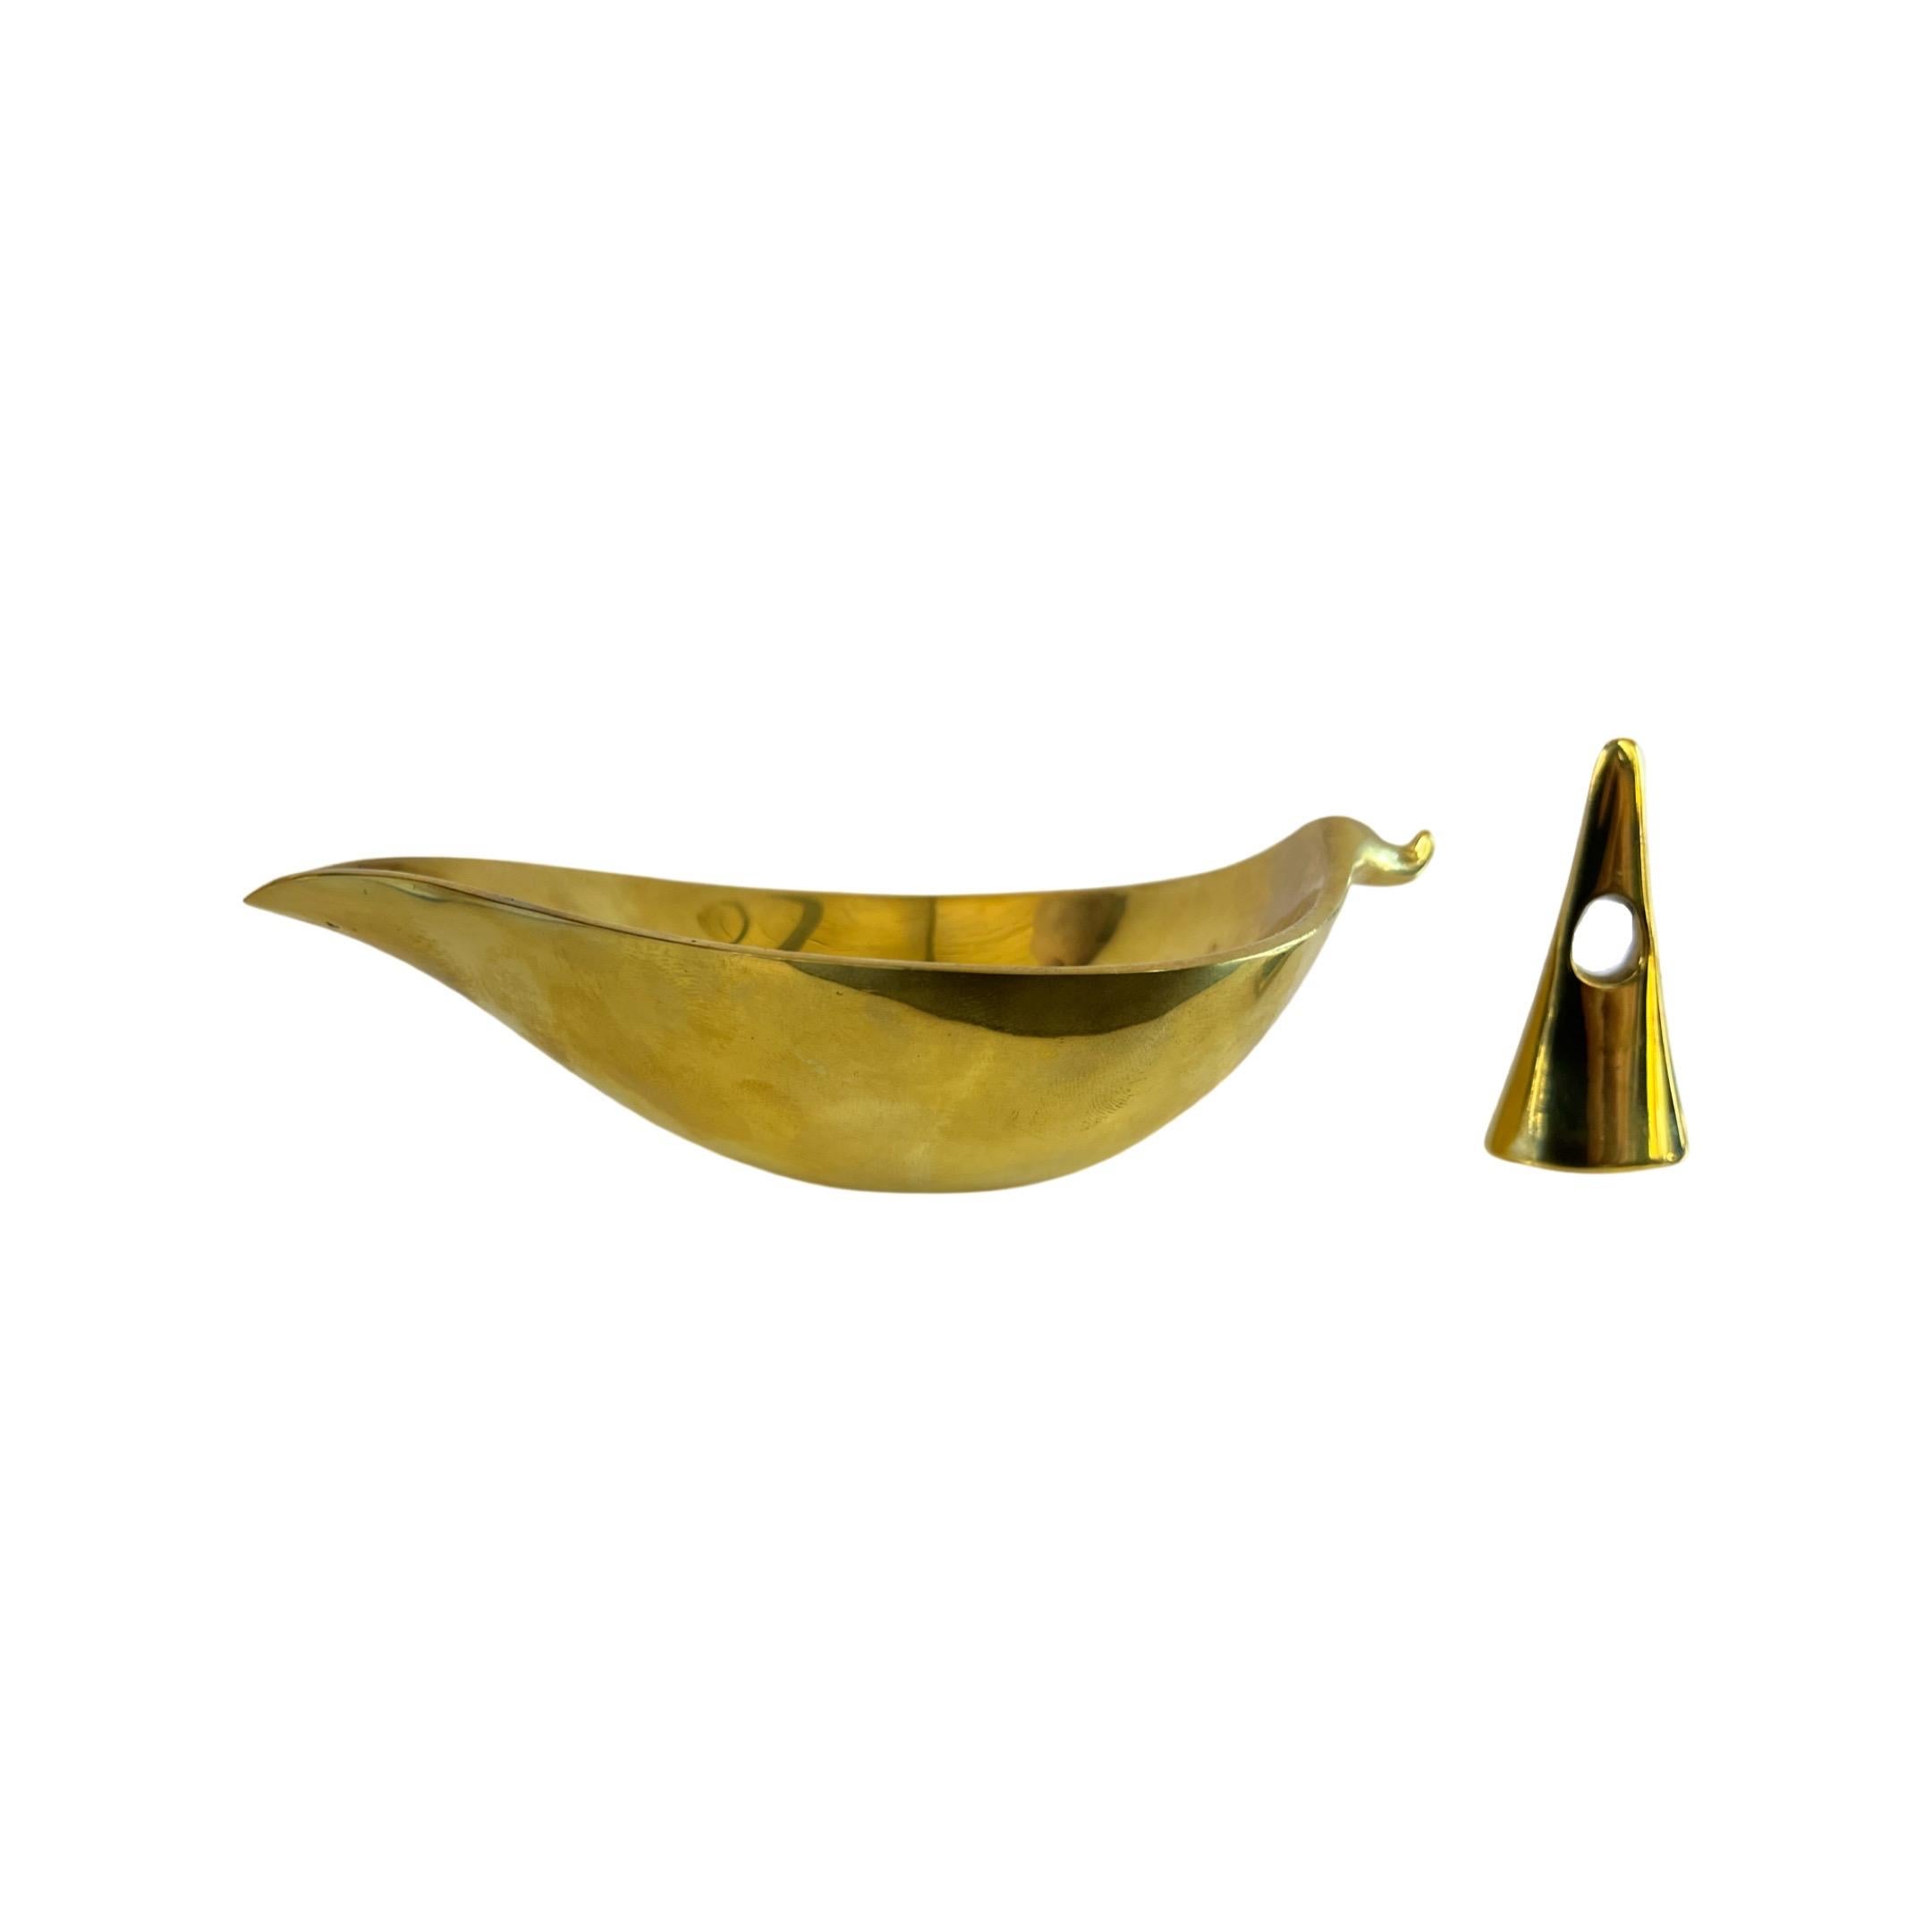 Austrian Carl Aubock Mid-Century Modern Brass Ashtray and Snuffer #3514 1950s Design For Sale